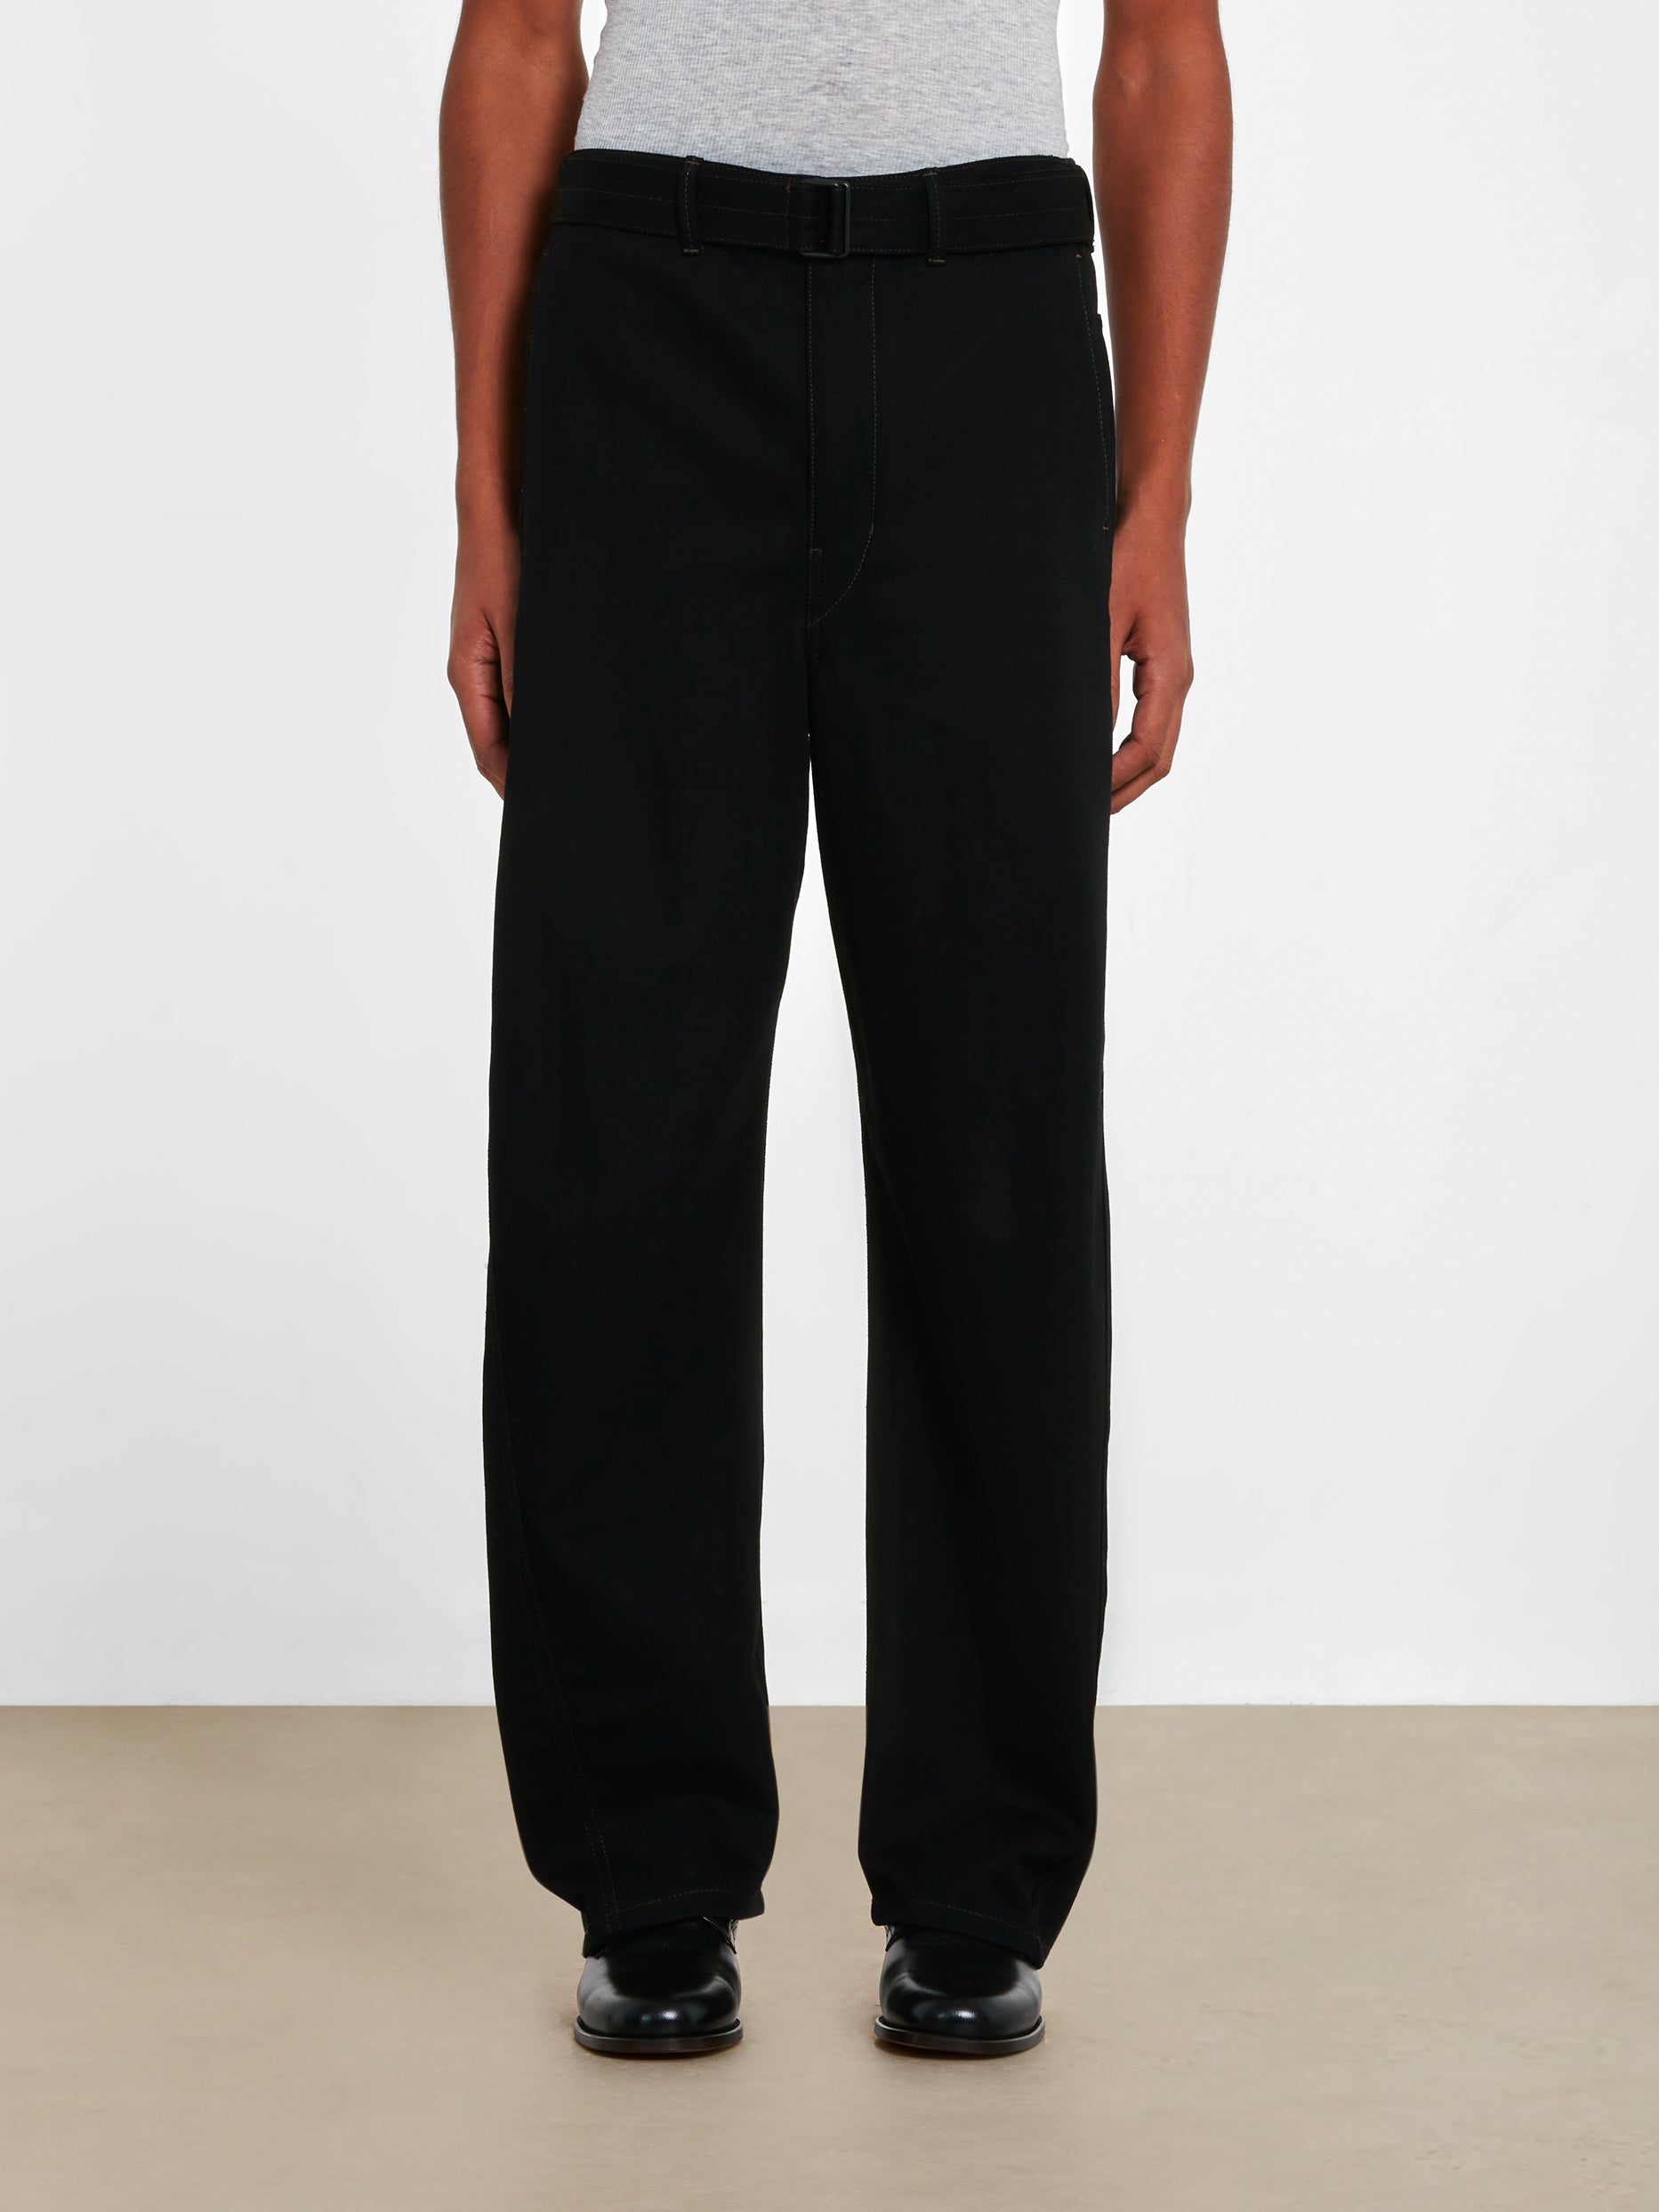 Lemaire - Men’s Twisted Belted Pants - (Black) view 1